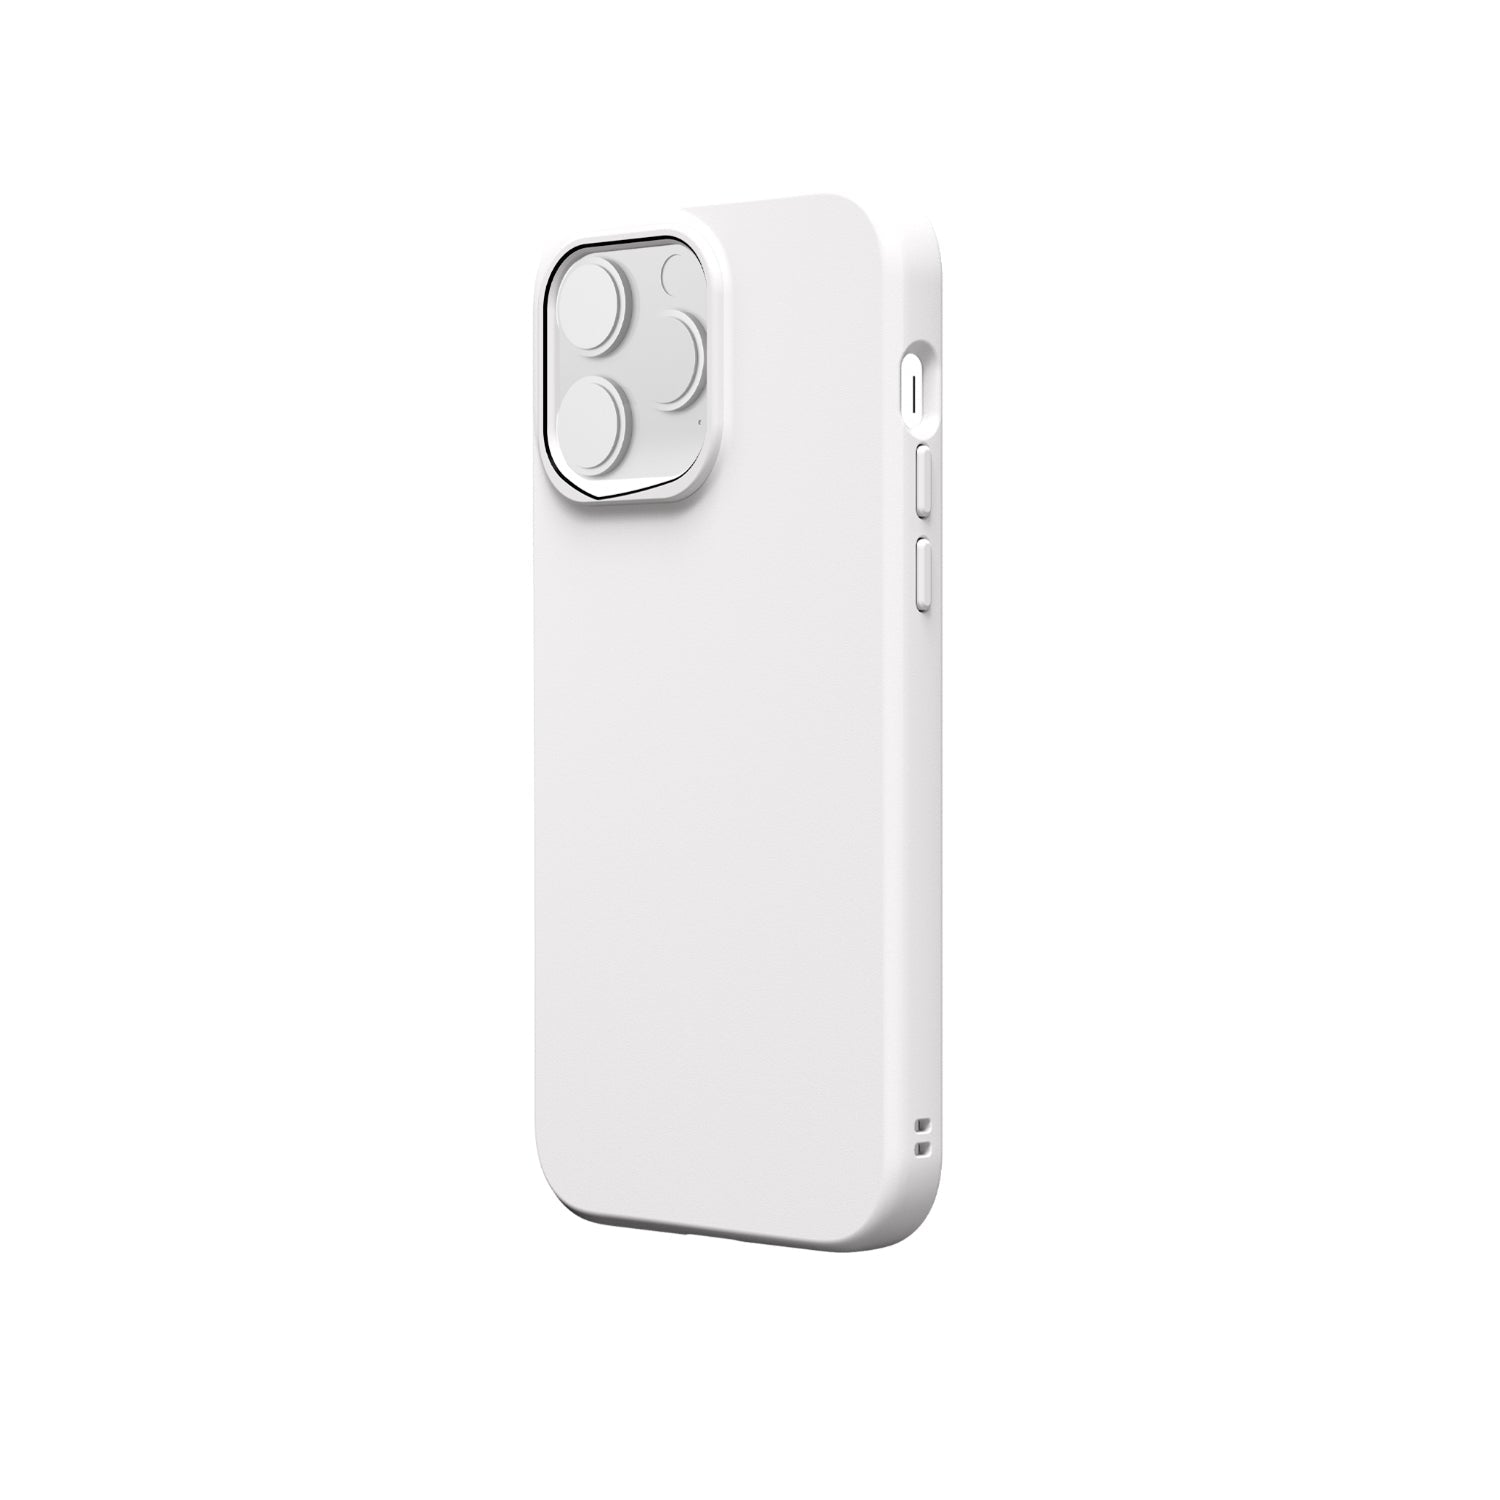 RhinoShield SolidSuit Case for iPhone 14 Series Mobile Phone Cases RhinoShield Classic White iPhone 14 Pro 6.1" 